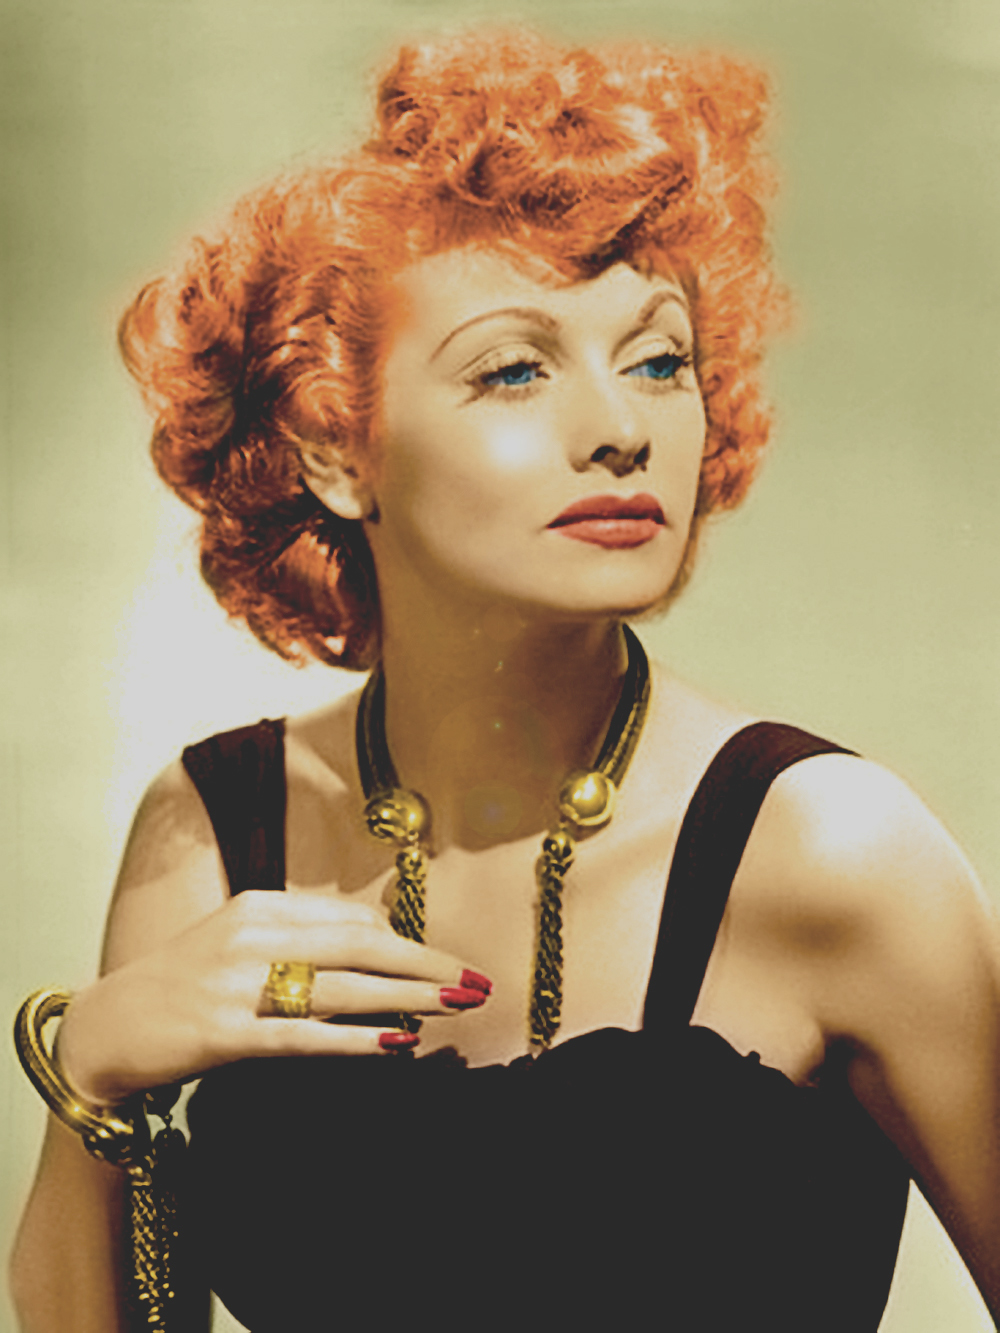 Image result for lucille ball